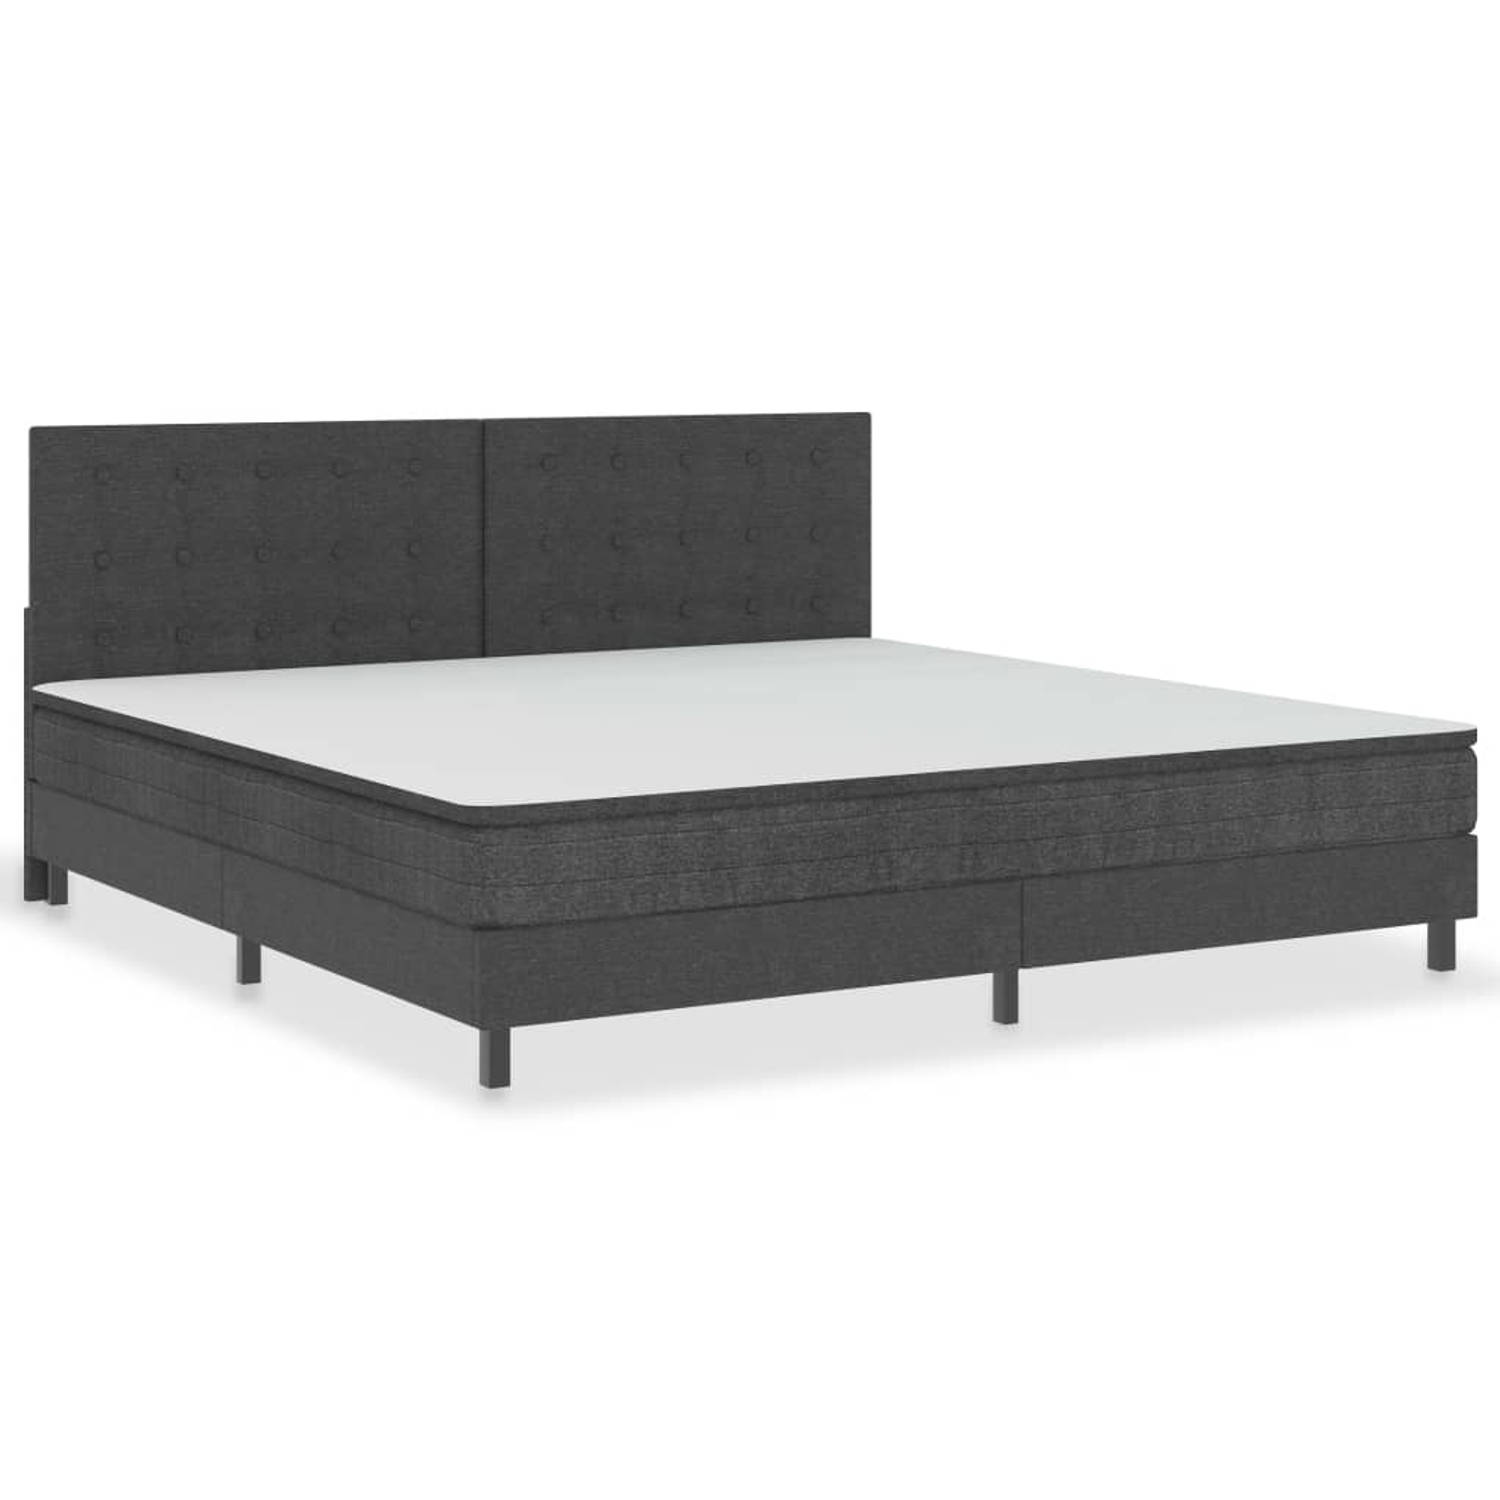 The Living Store Boxspring stof donkergrijs 200x200 cm - Boxspring - Boxsprings - Boxspringbed - Boxspringbedden - Hotelbed - Hotelbedden - Bed - Bedden - Tweepersoonsbed - Tweeper